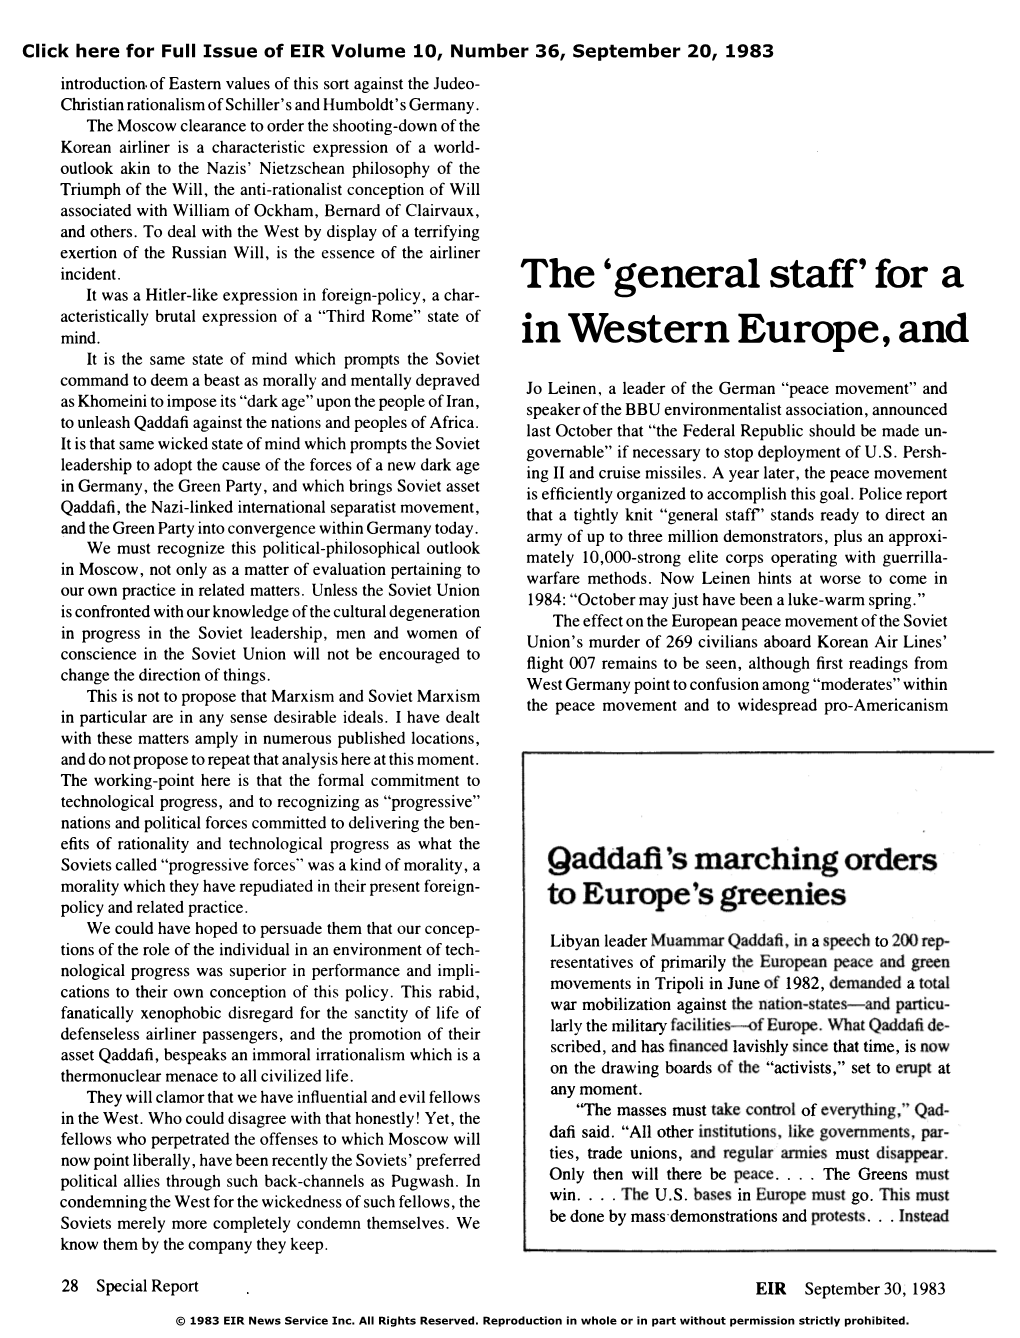 The 'General Staff' for a Hot Autumn in Western Europe, and Who's